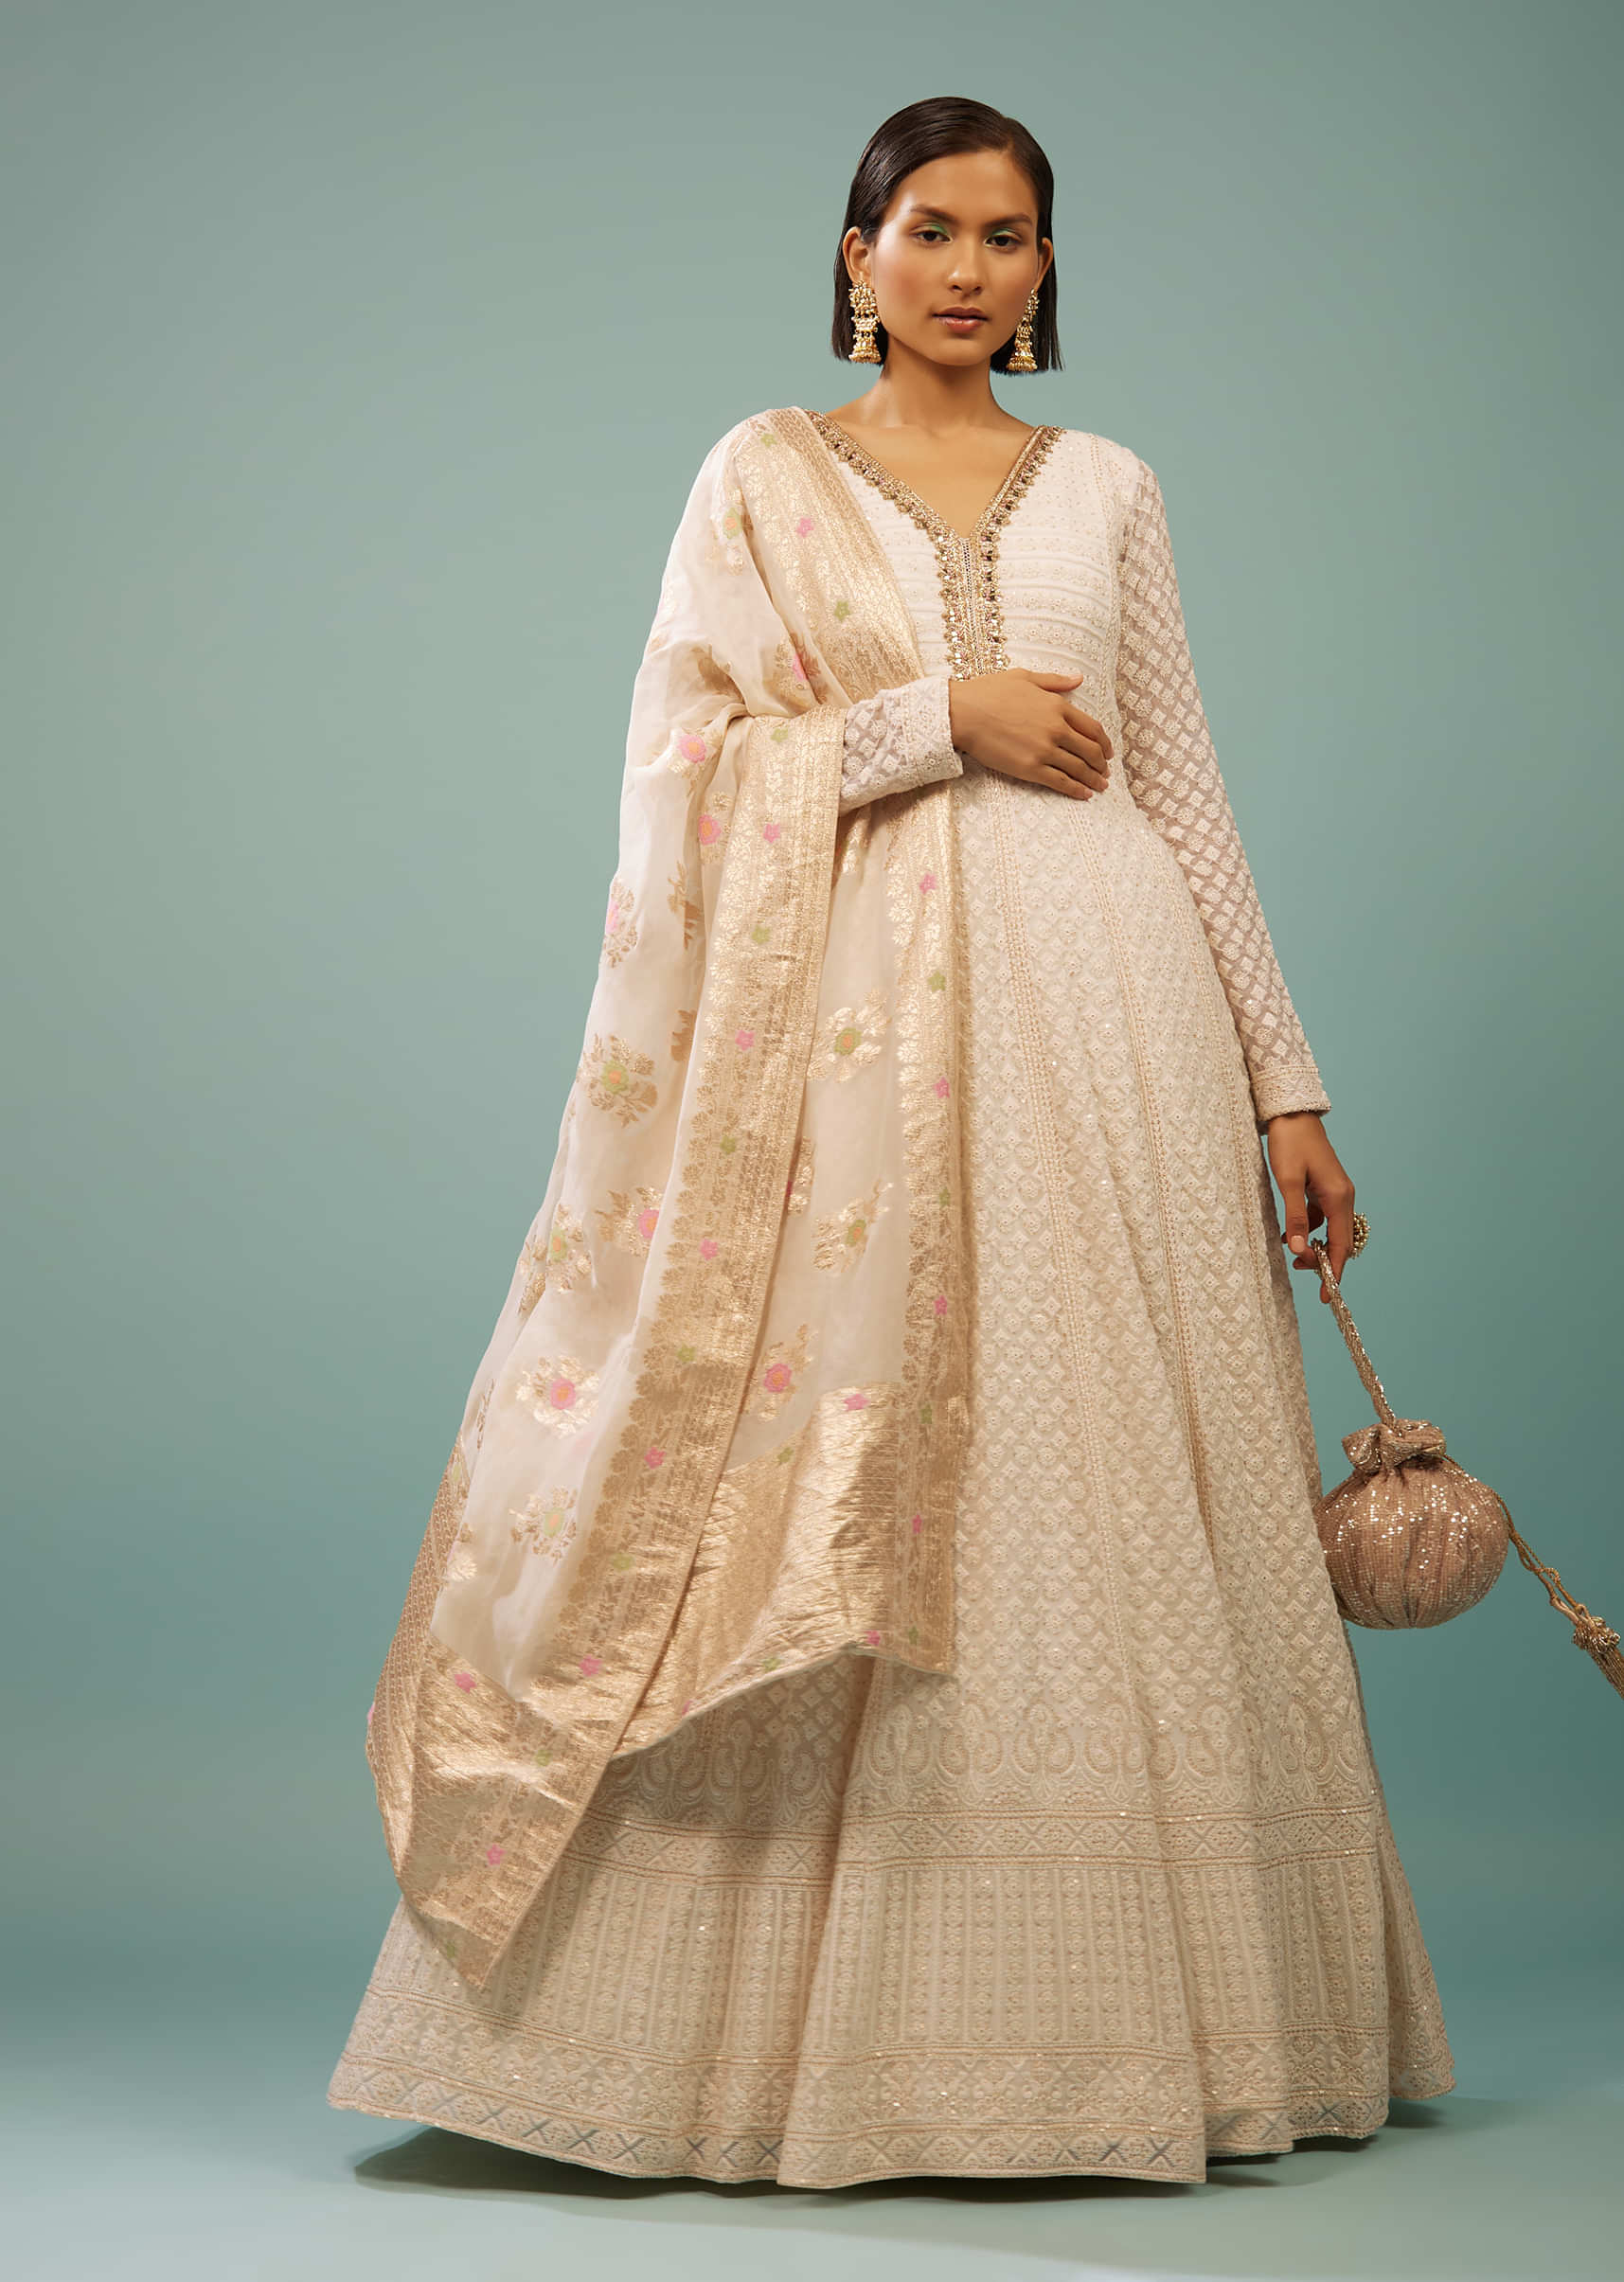 Daisy White Lucknowi Anarkali Suit In Georgette With Embroidery